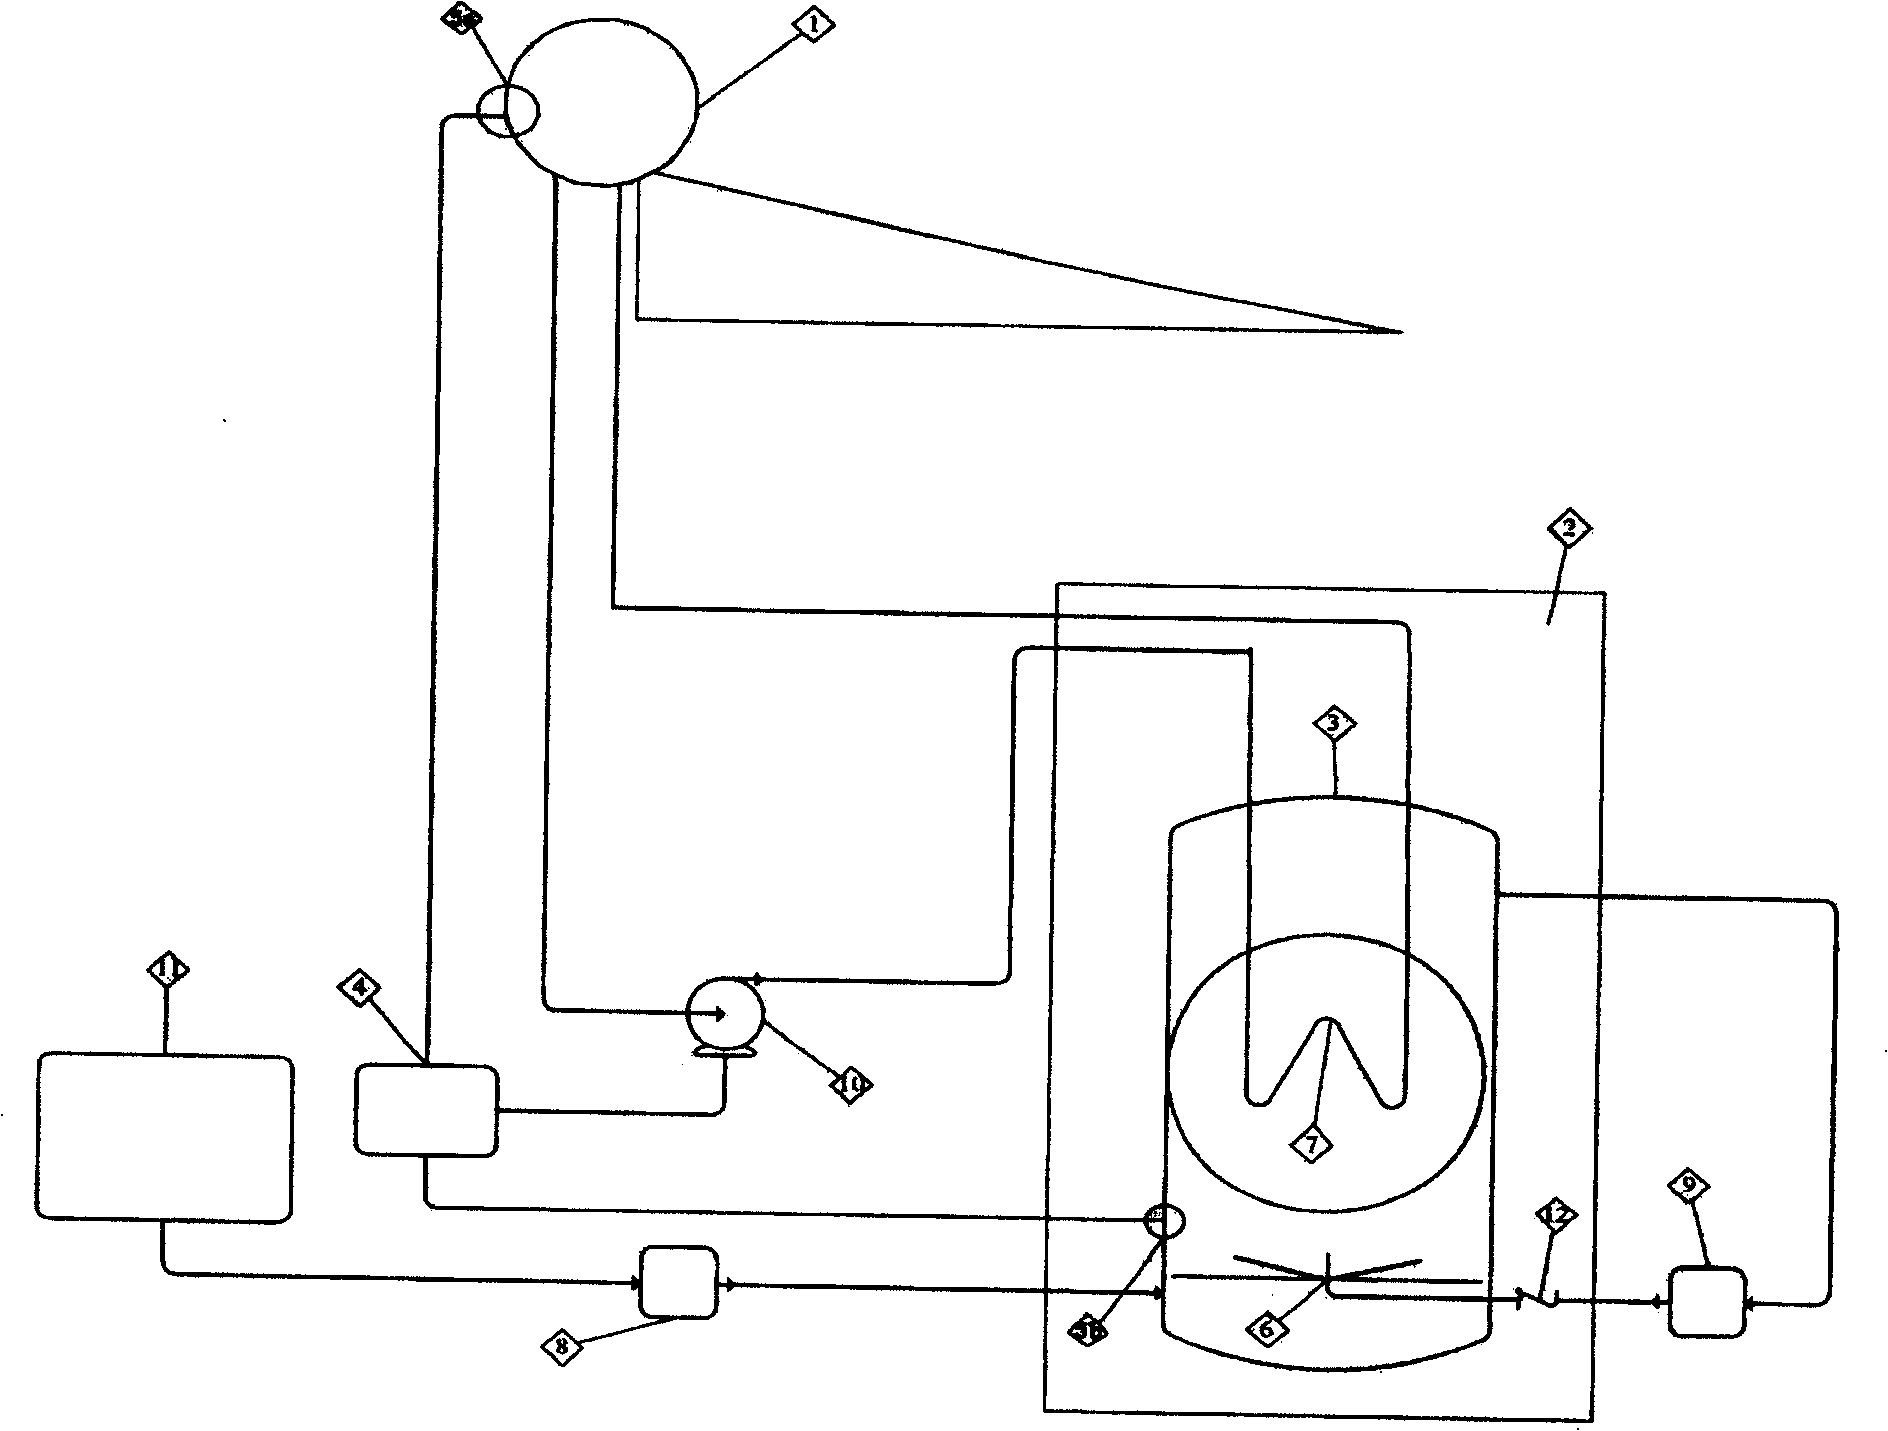 Combined temperature increasing device and method by anaerobic degesting greenhouse